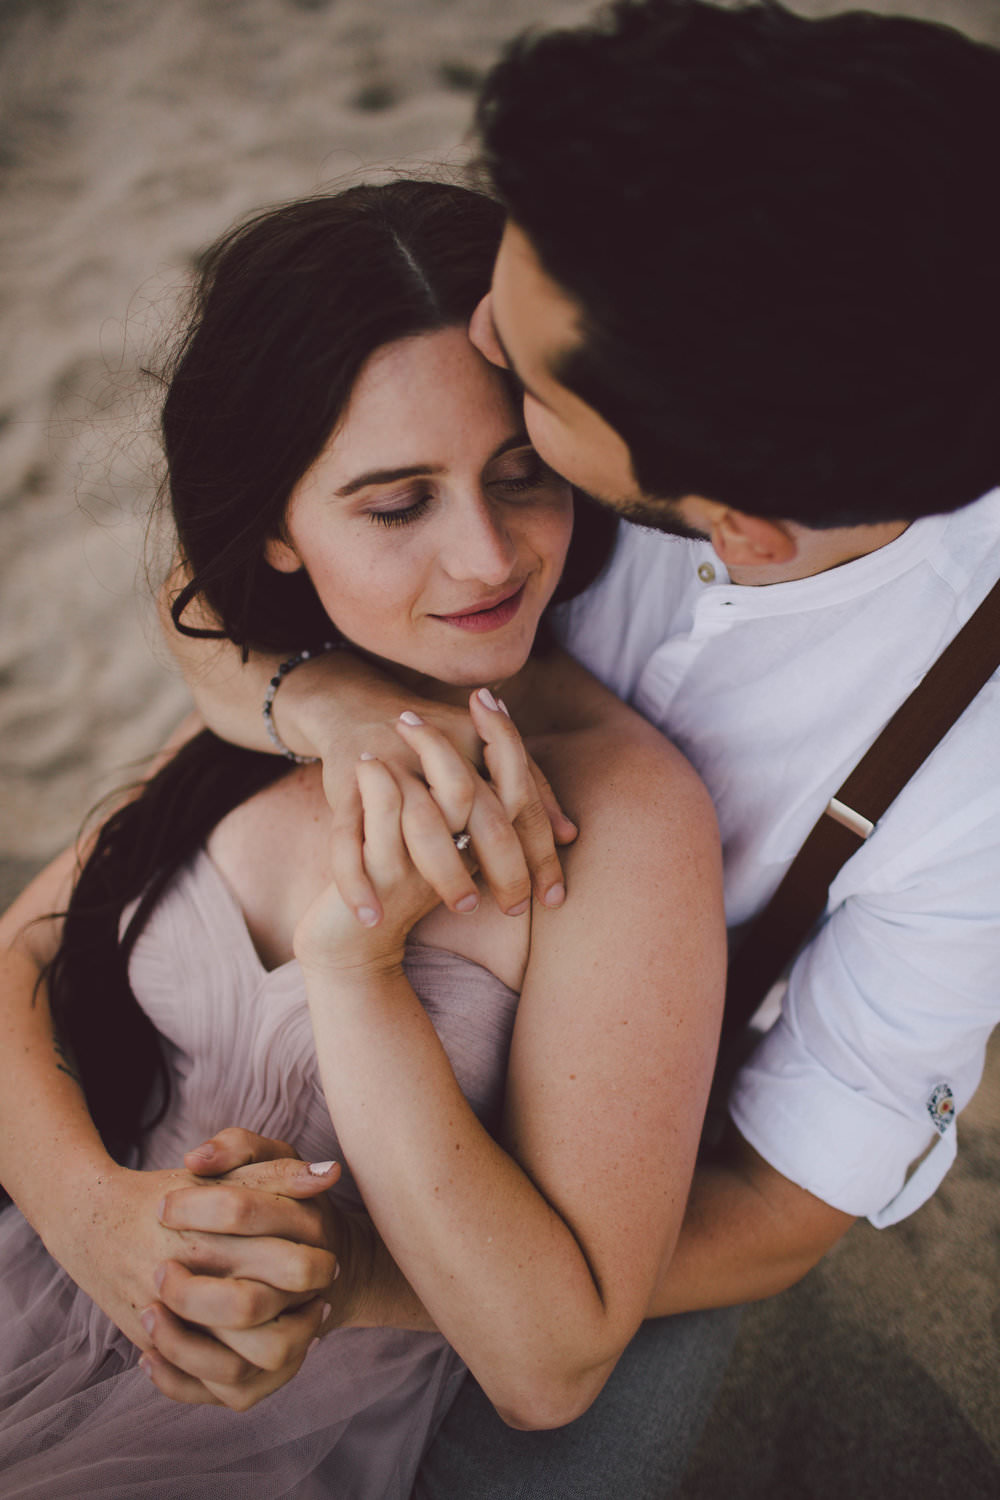  Los angeles wedding photographer, where to elope in california, how to elope in los angeles, beach elopement, beach elopement locations, grace loves lace wedding dress, elopement ideas, elopement dress, sunrise elopement, california elopement packages,california elopement ideas, elopement inspiration, adventure elopement ideas, sunset elopement, sunset wedding, small wedding, places to elope in california, destination elopement, malibu elopement, adventure elopement, elopement bouquet 